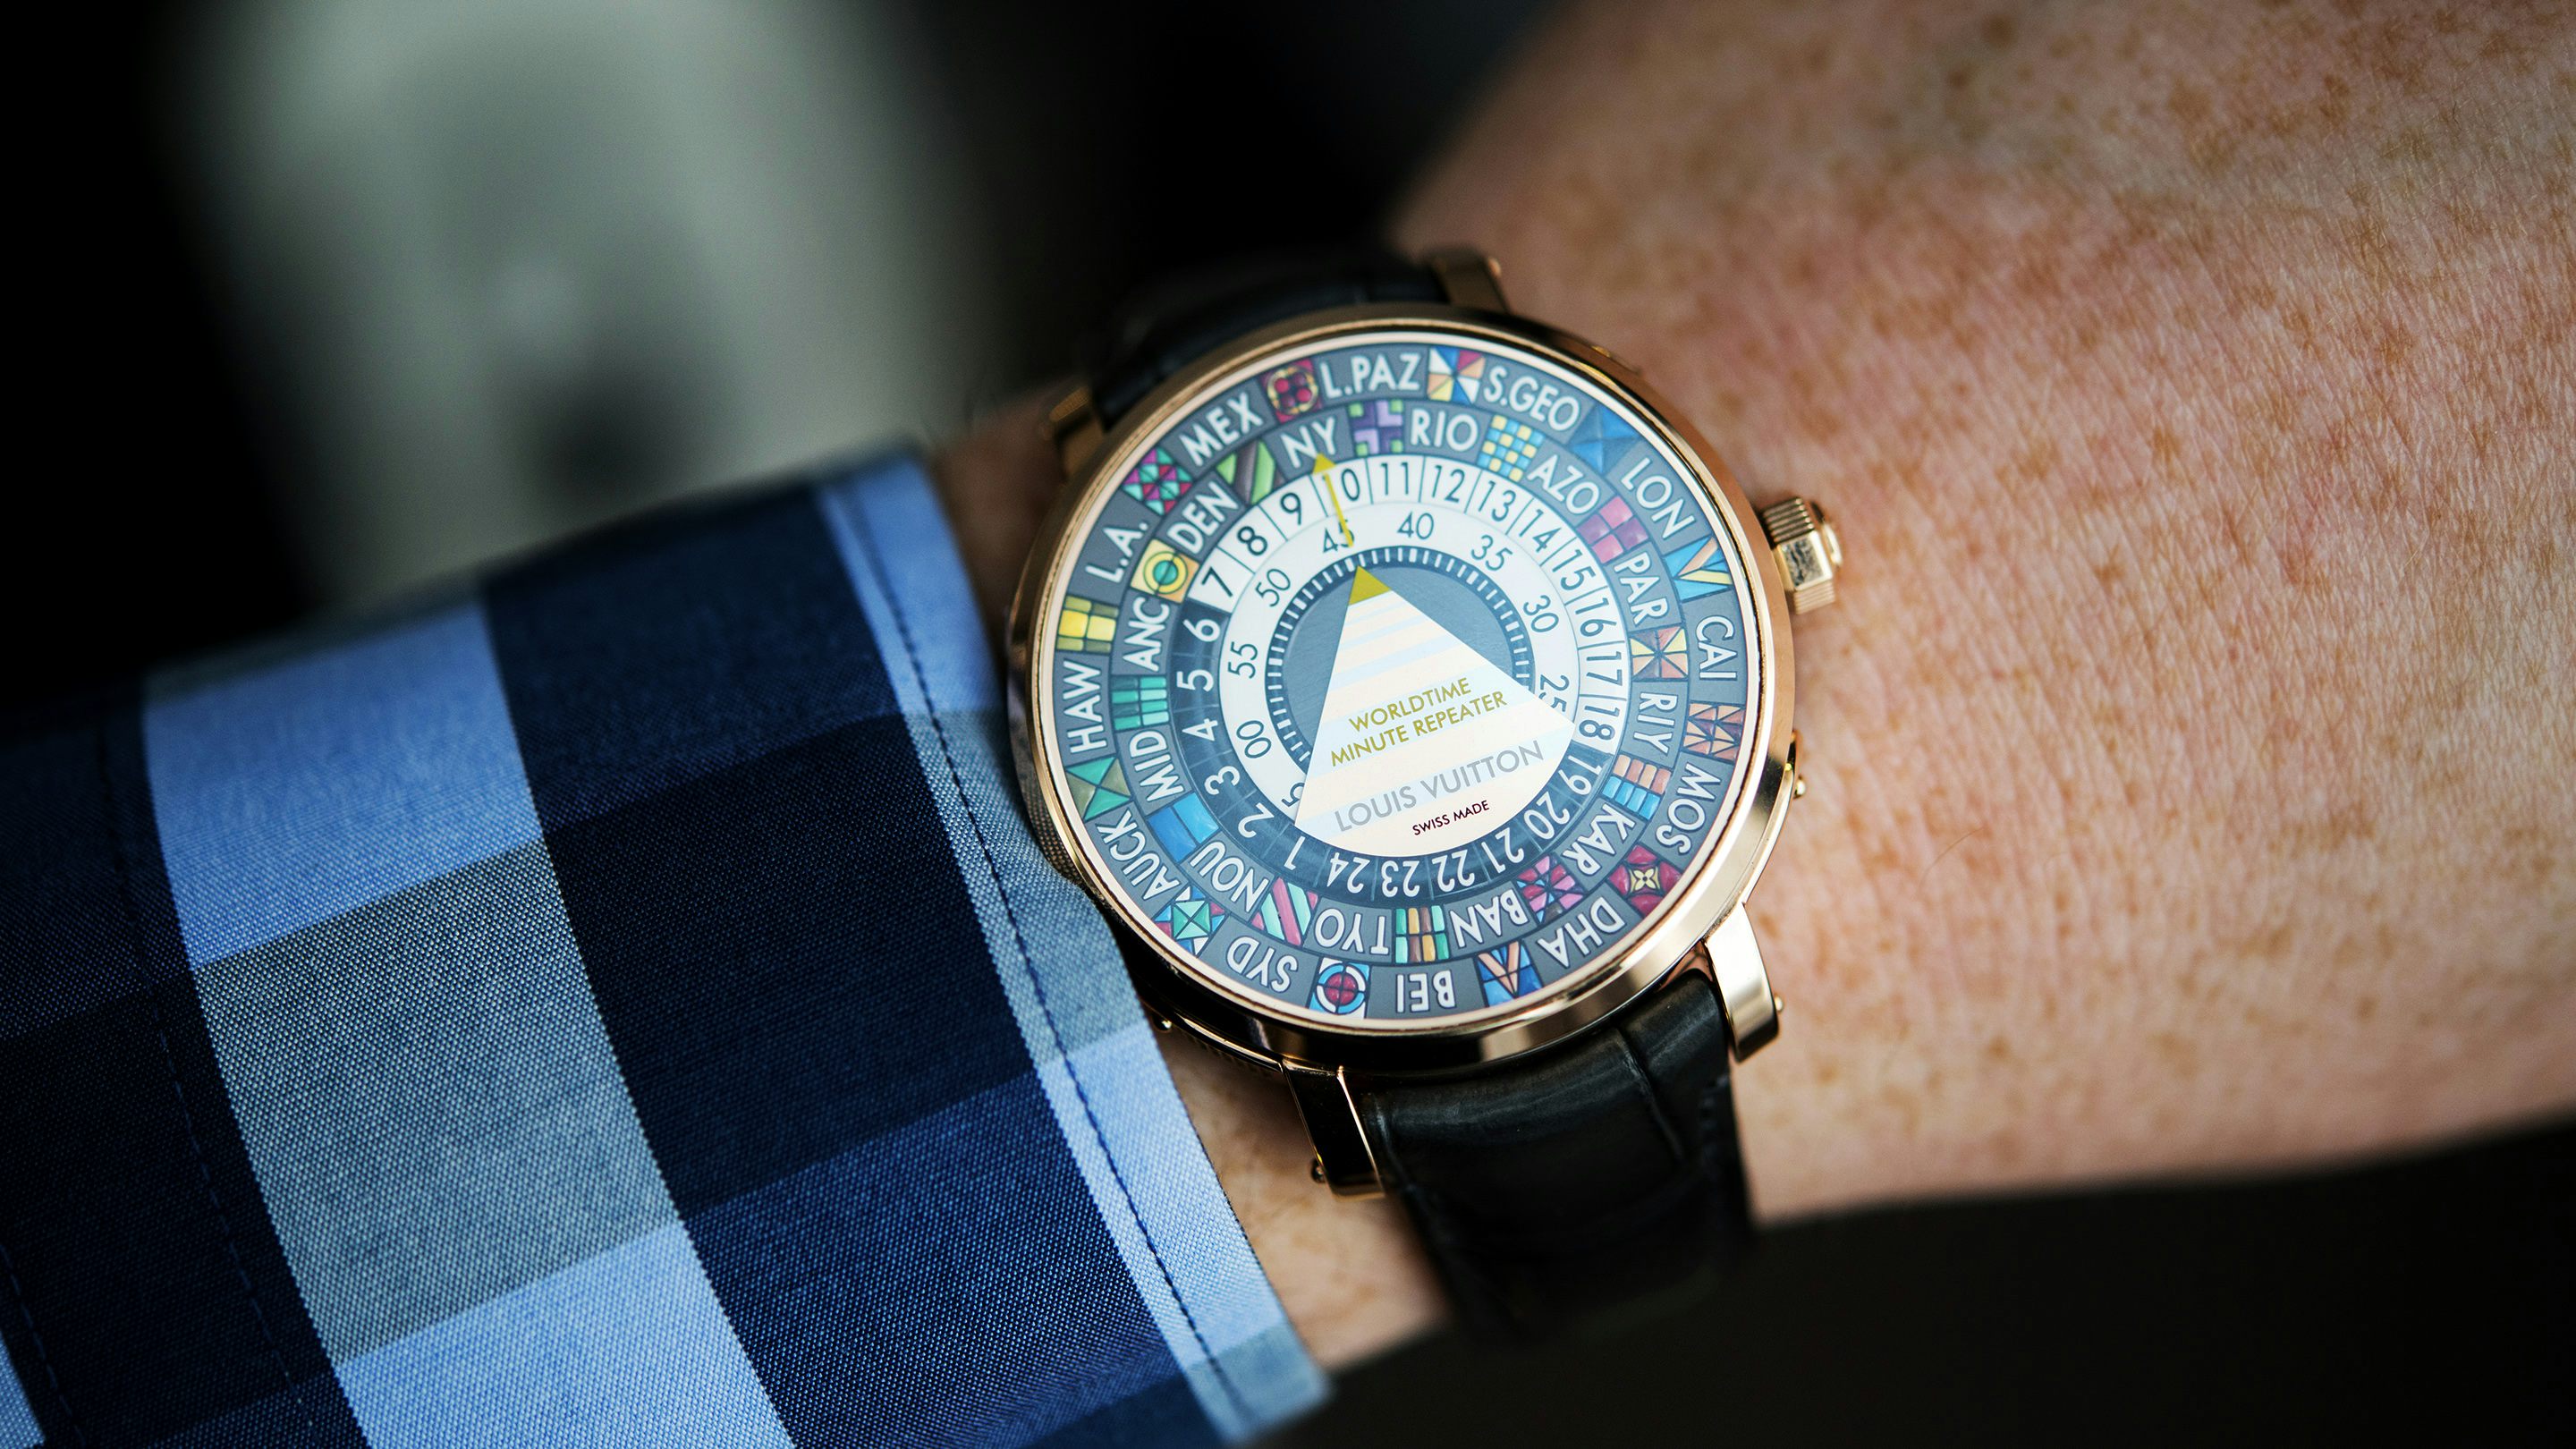 The Escale Time Zone, A New Manufacture World-Timer by Louis Vuitton -  Hodinkee